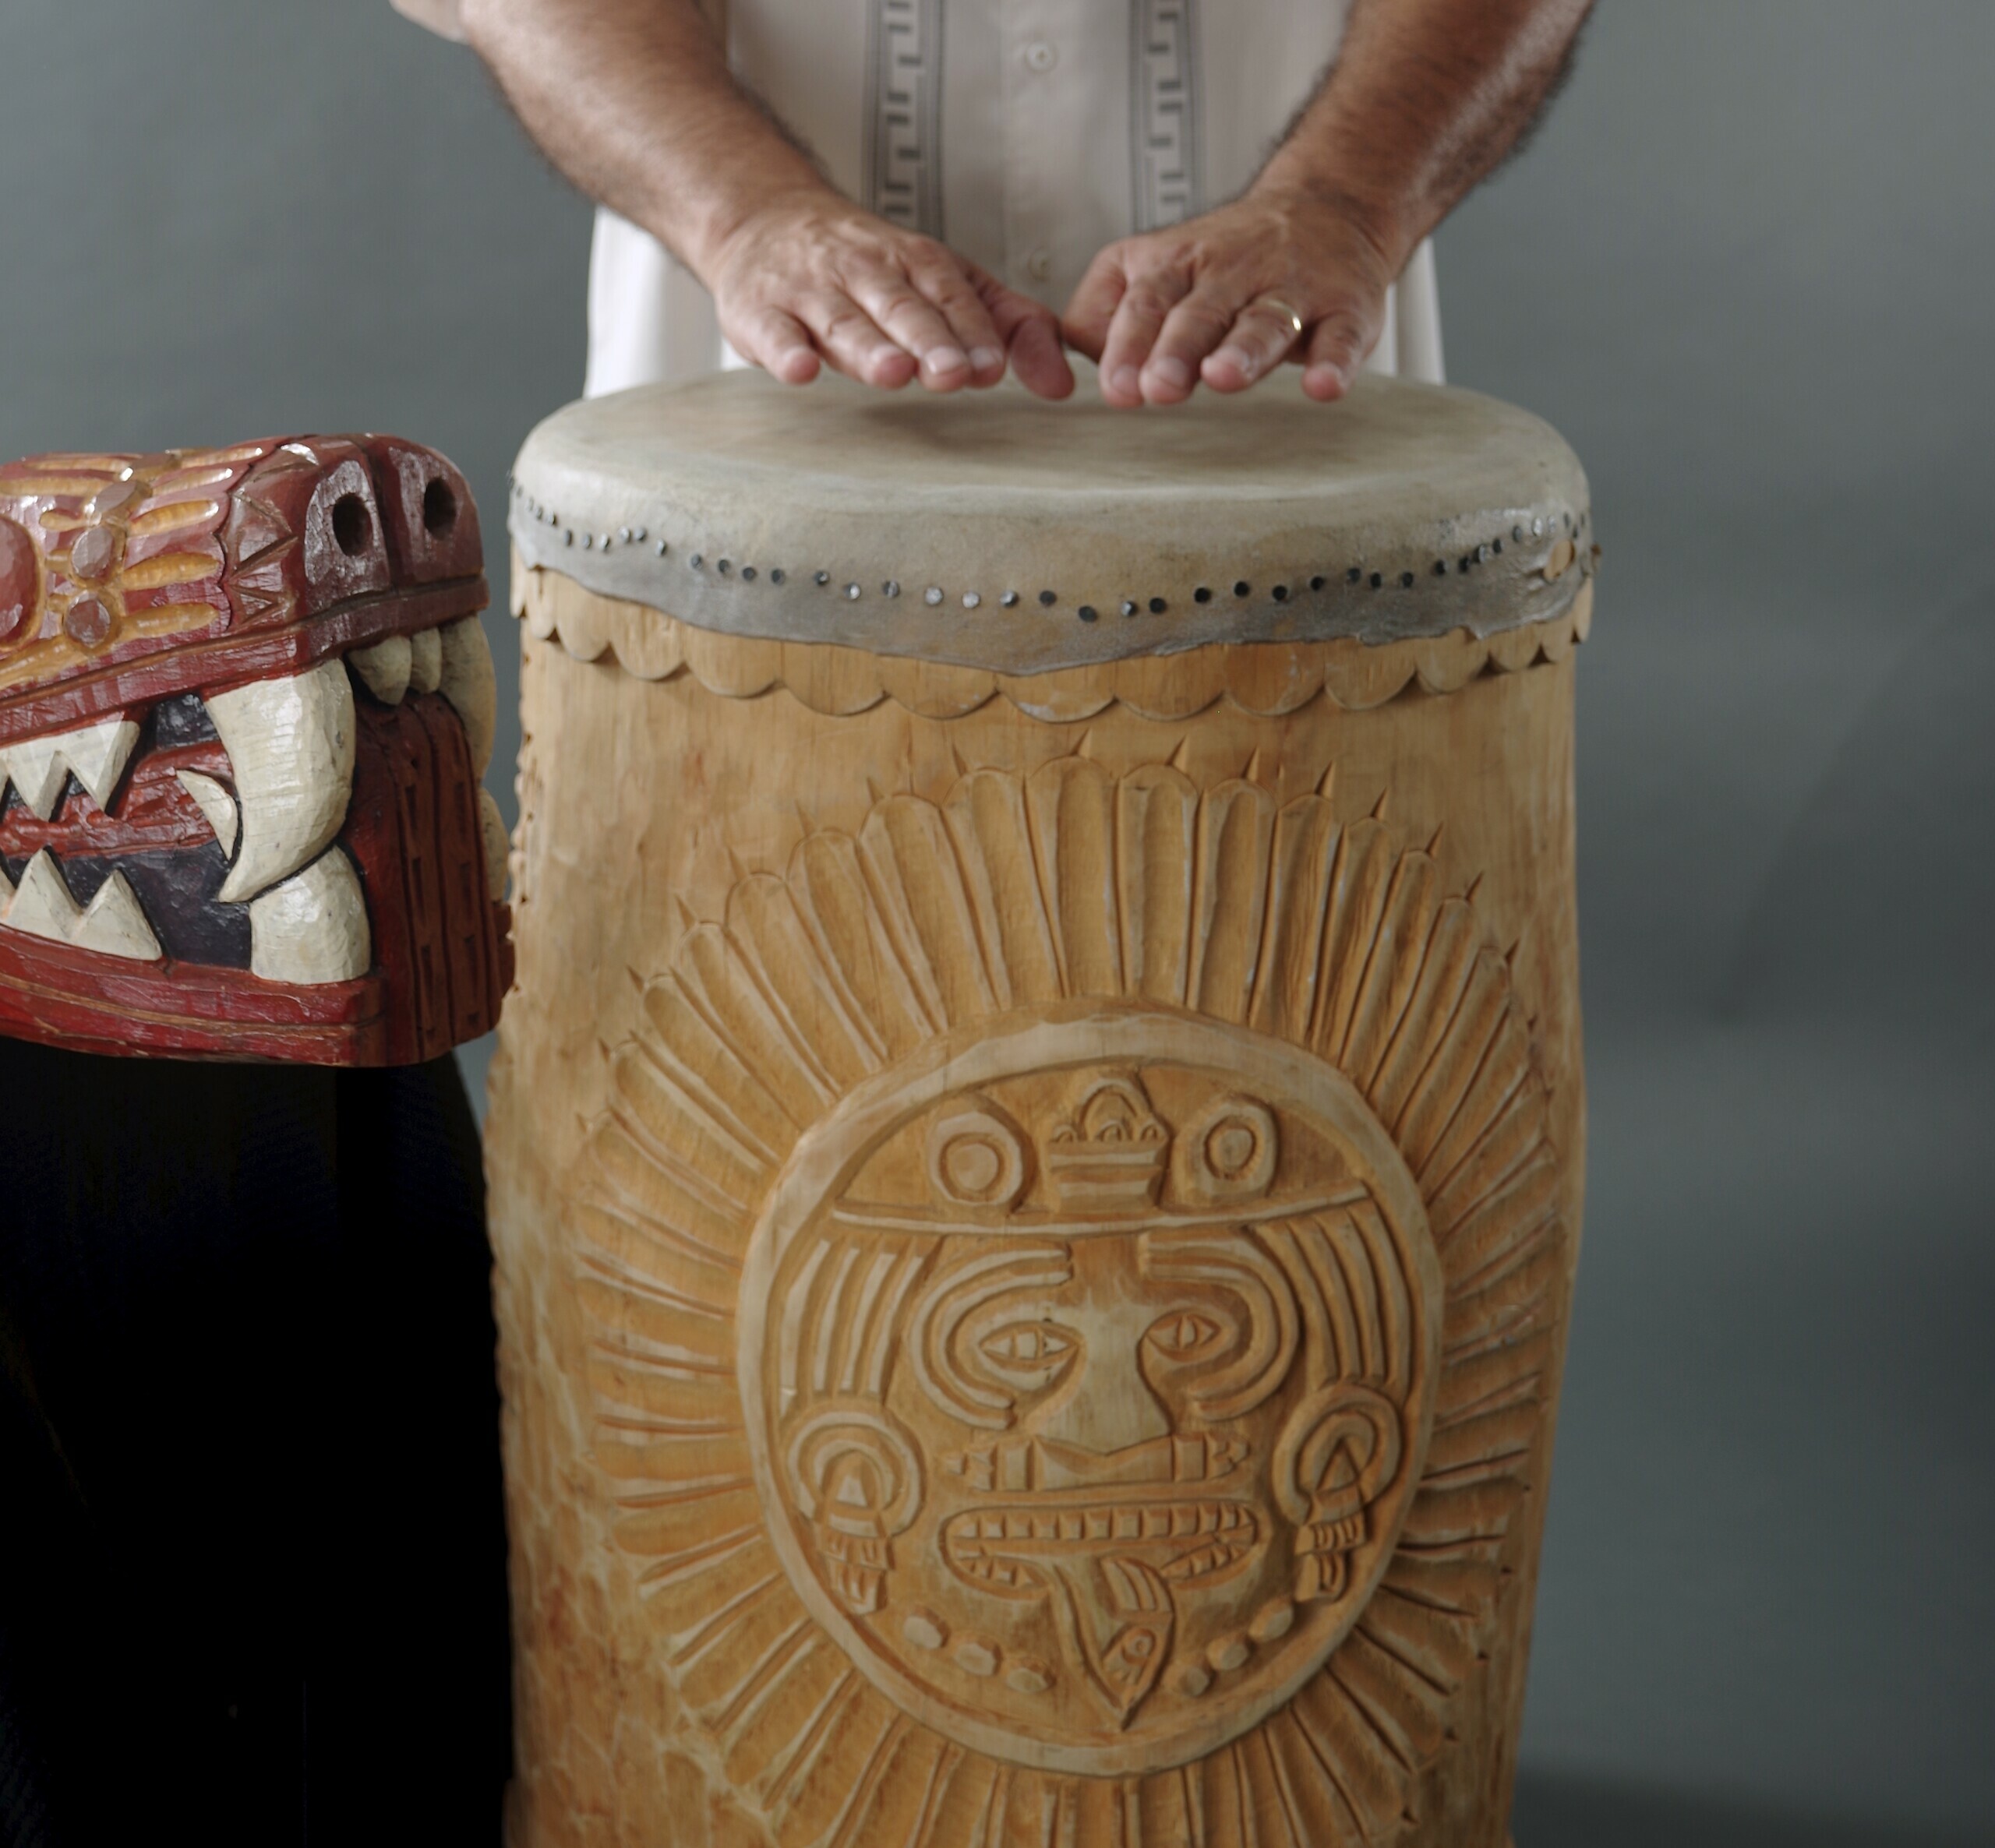 hands beating a tall wooden carved drum